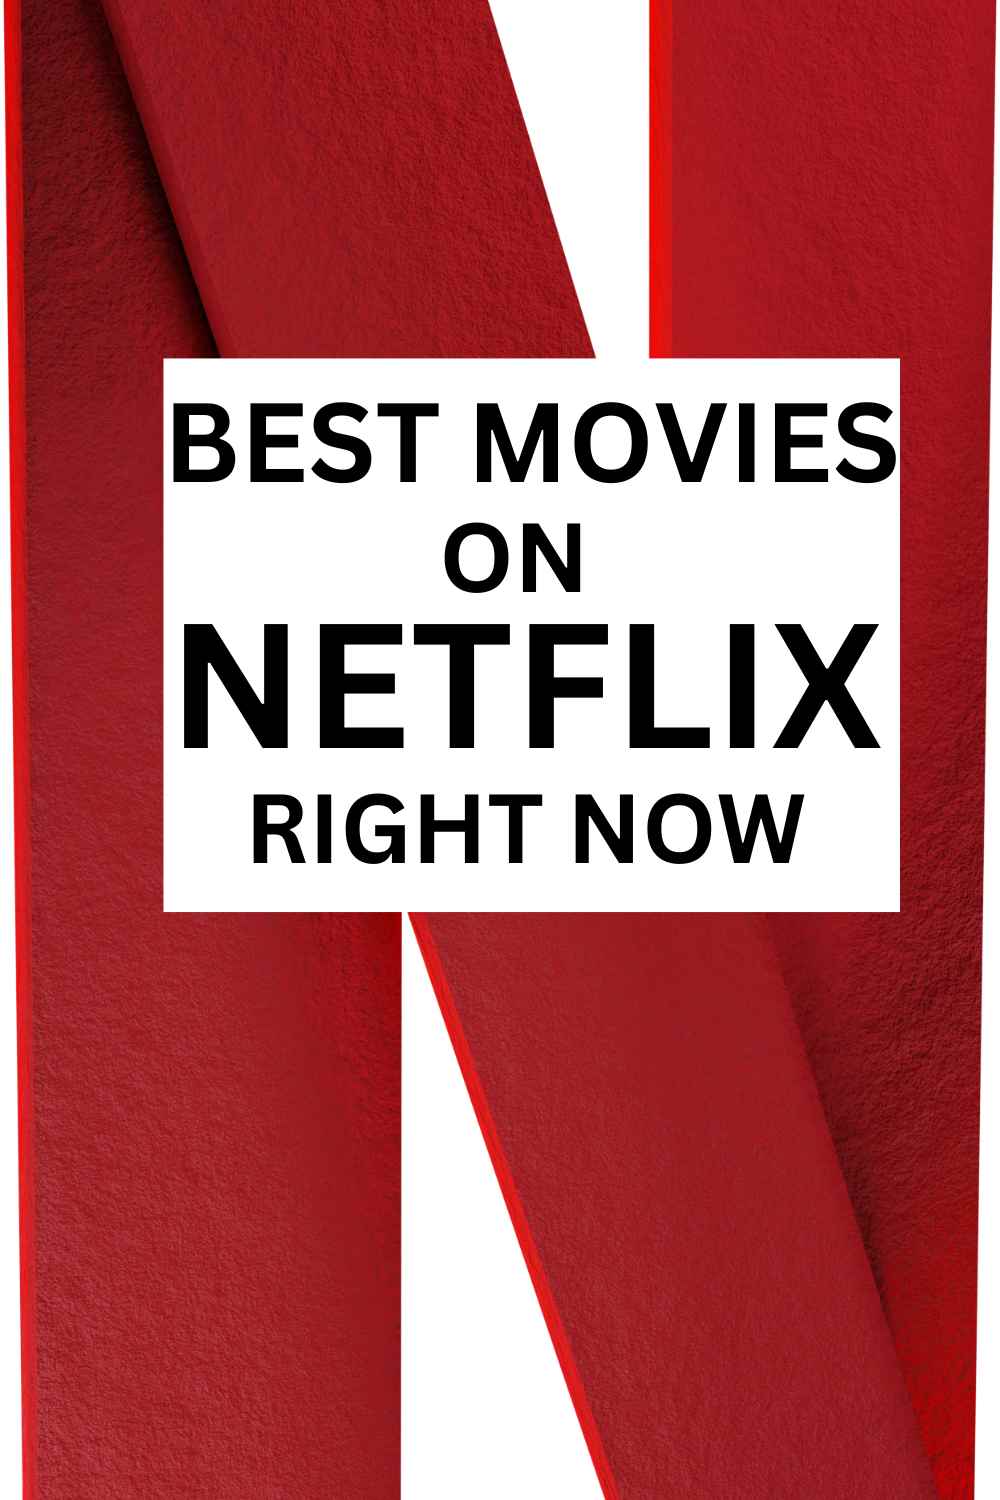 30 Best movies on Netflix right now